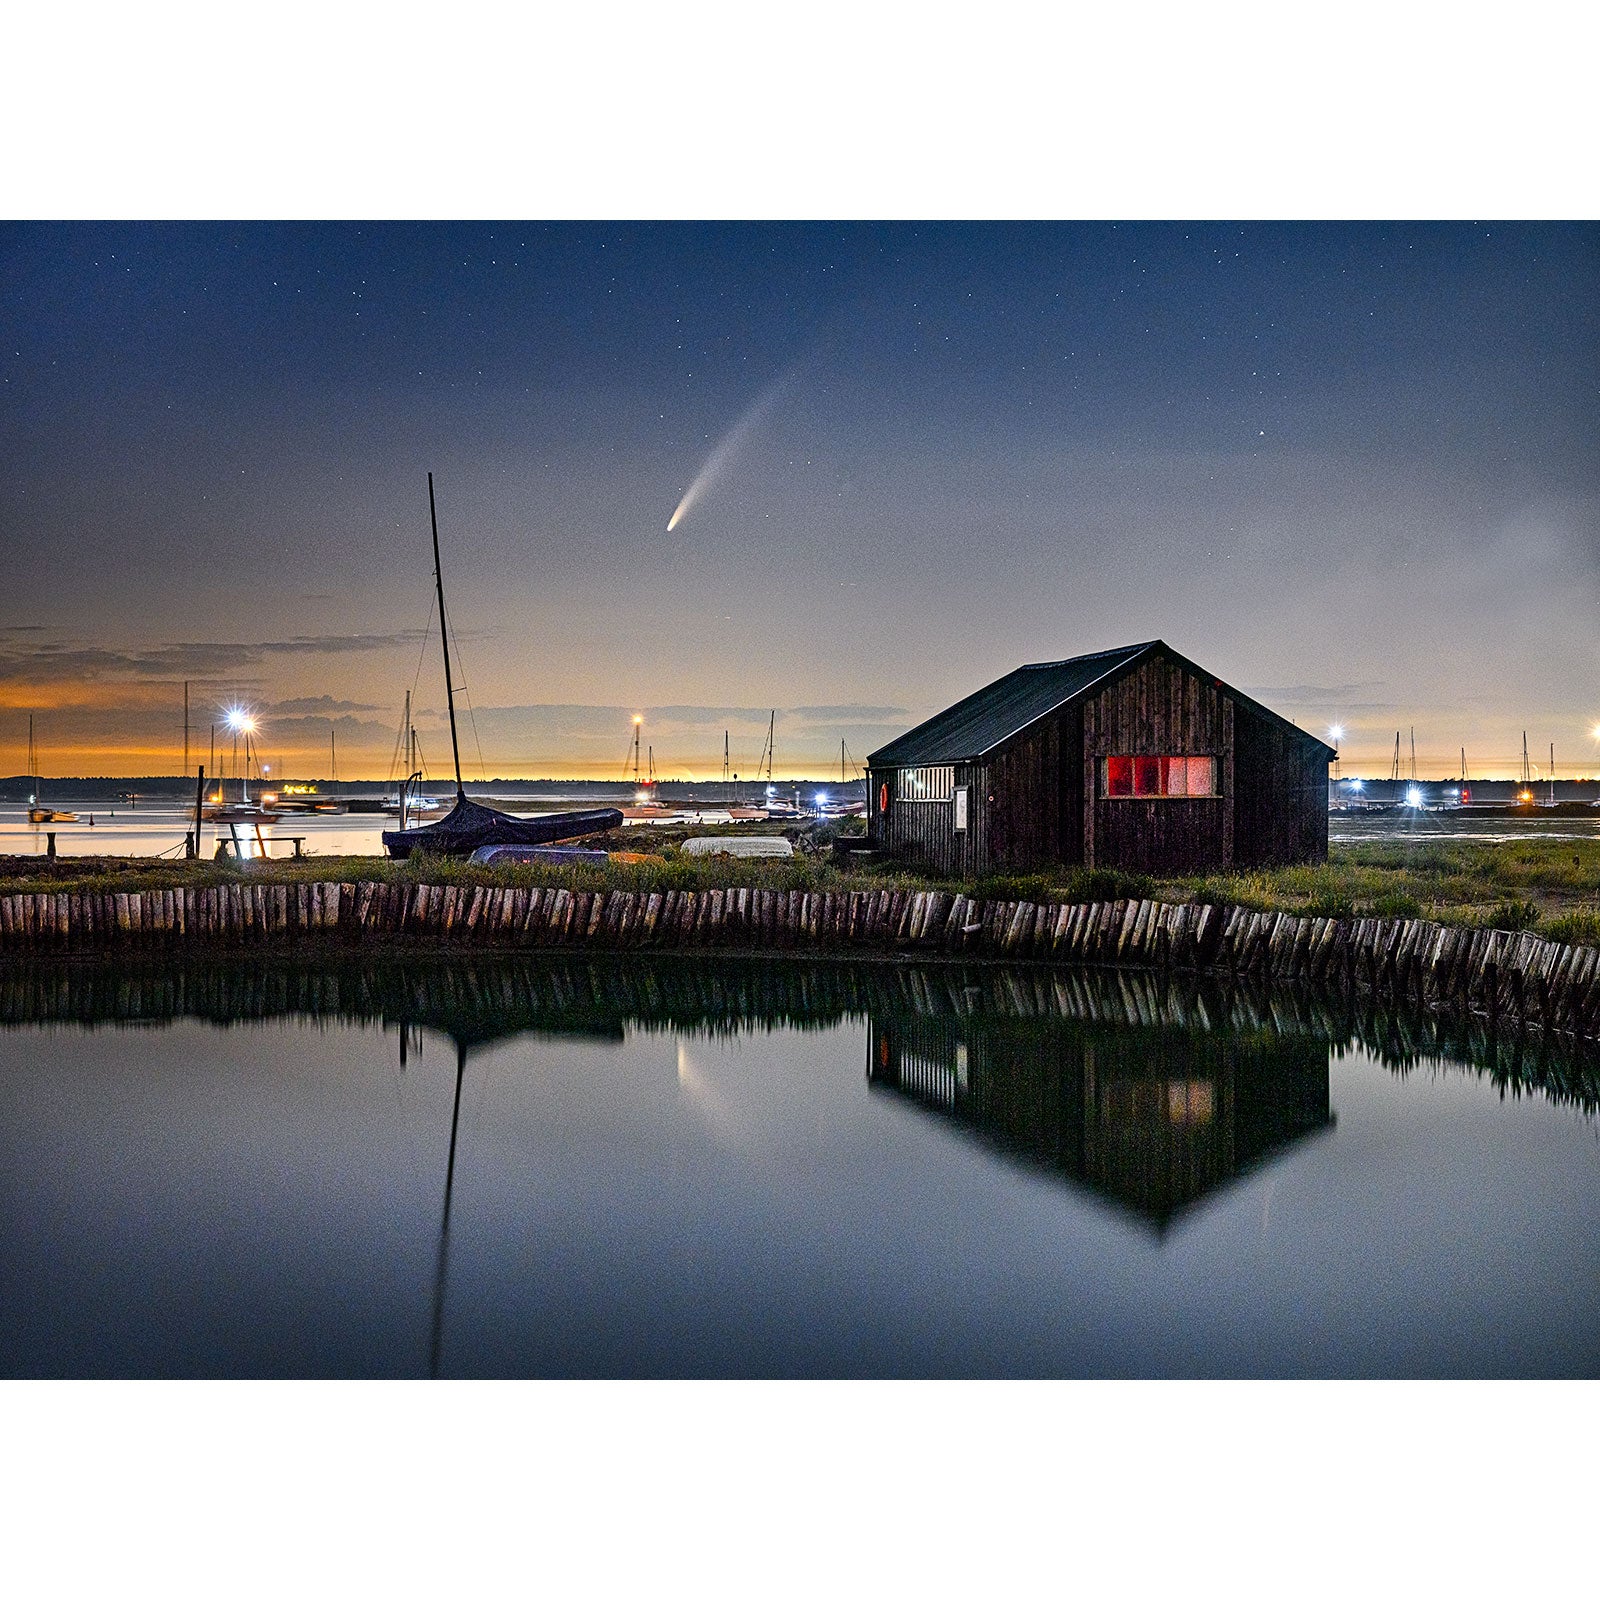 Neowise Comet over Newtown Creek - Available Light Photography